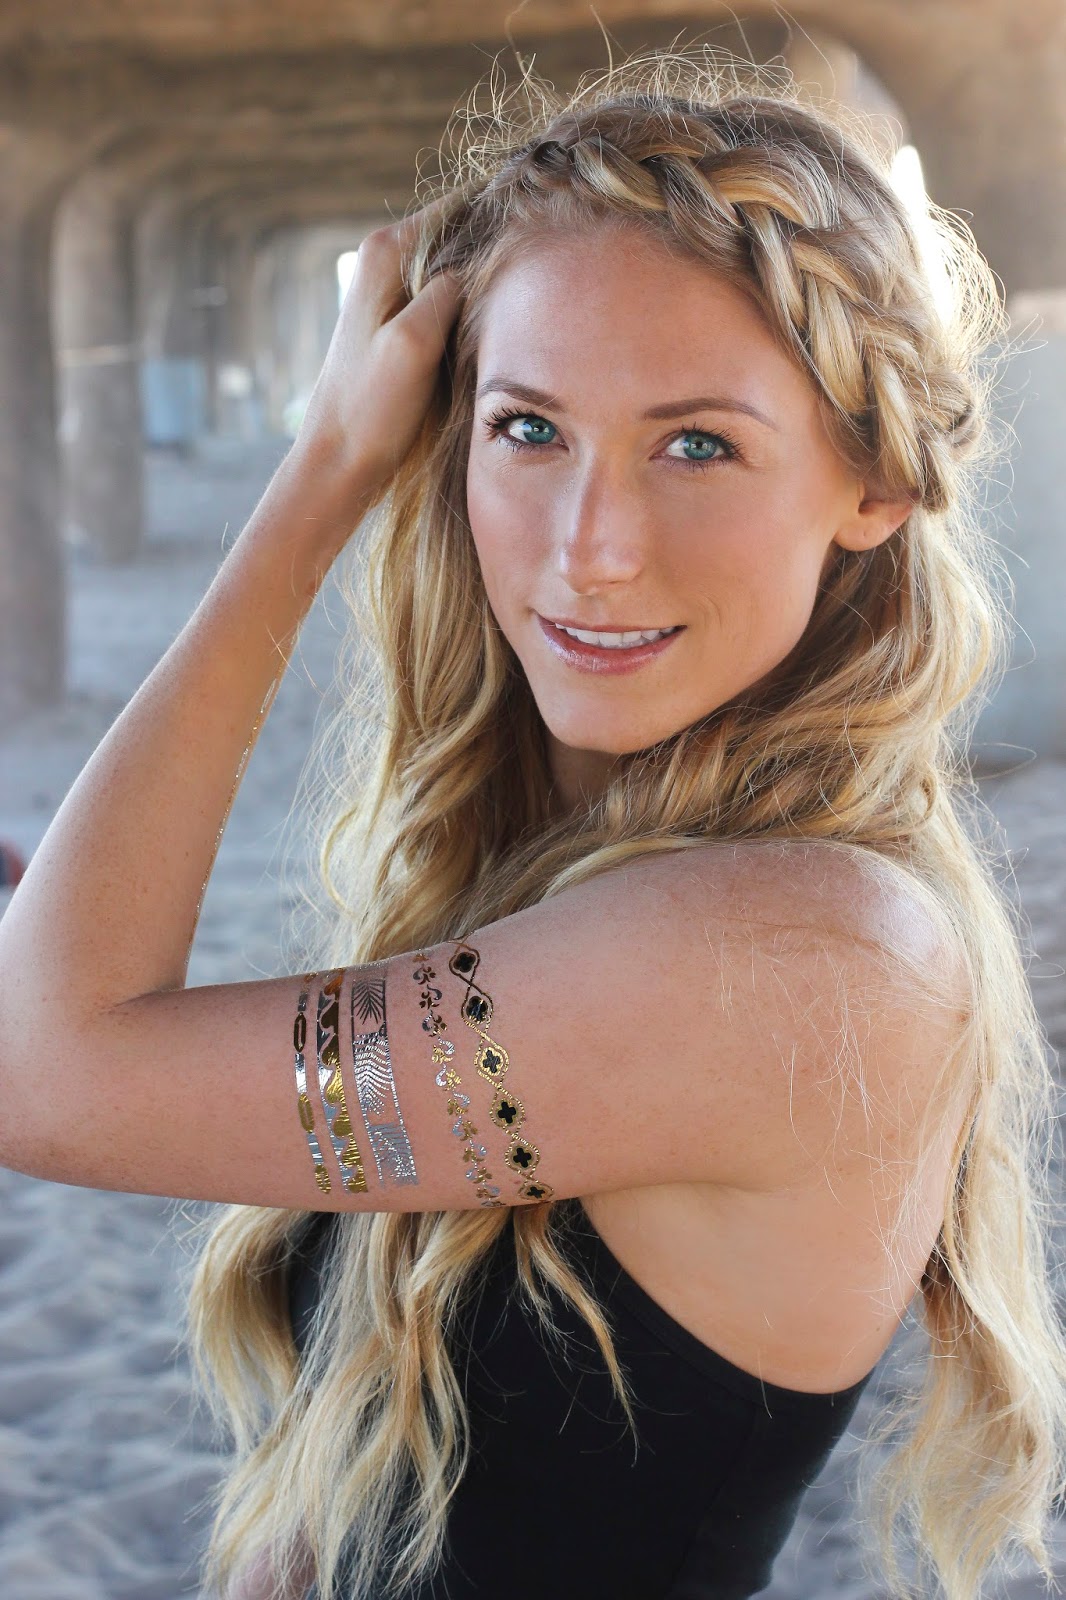 Gold Silver and Black Metallic Temporary Tattoo Arm Bands. Pretty Boho Braid with Beach Waves from Design Life Diaries